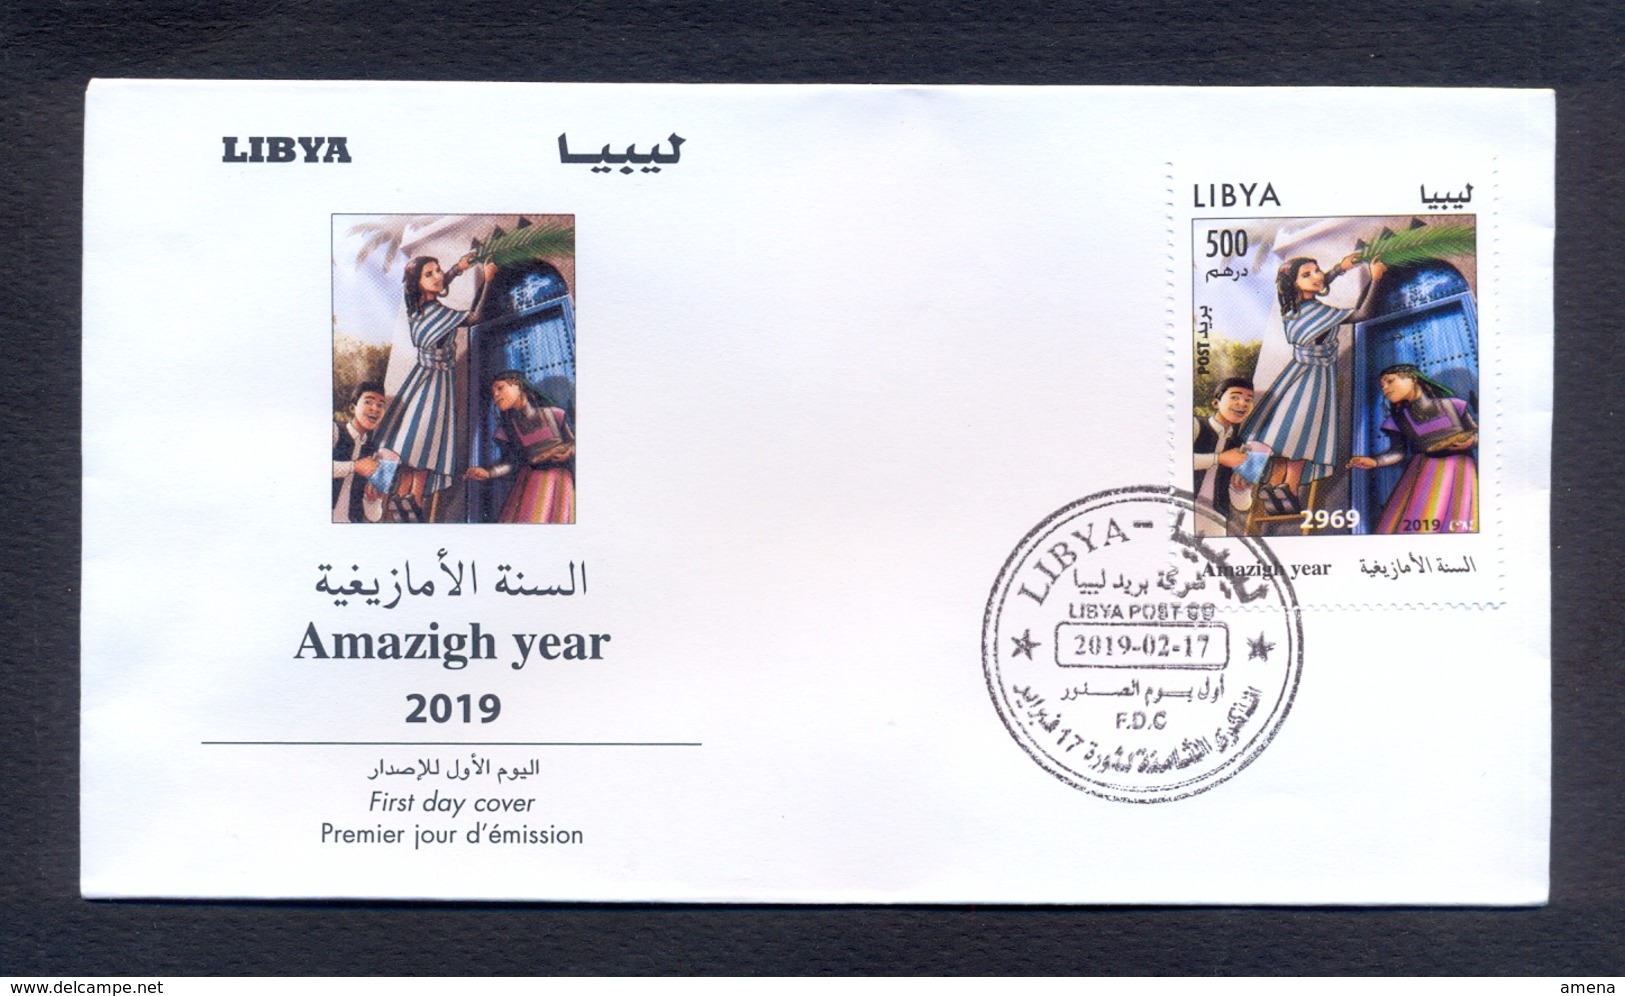 Libye/Libya 2019 - FDC - Année Amazighe/ Amazigh Year - MNH** Excellent Quality - Libye